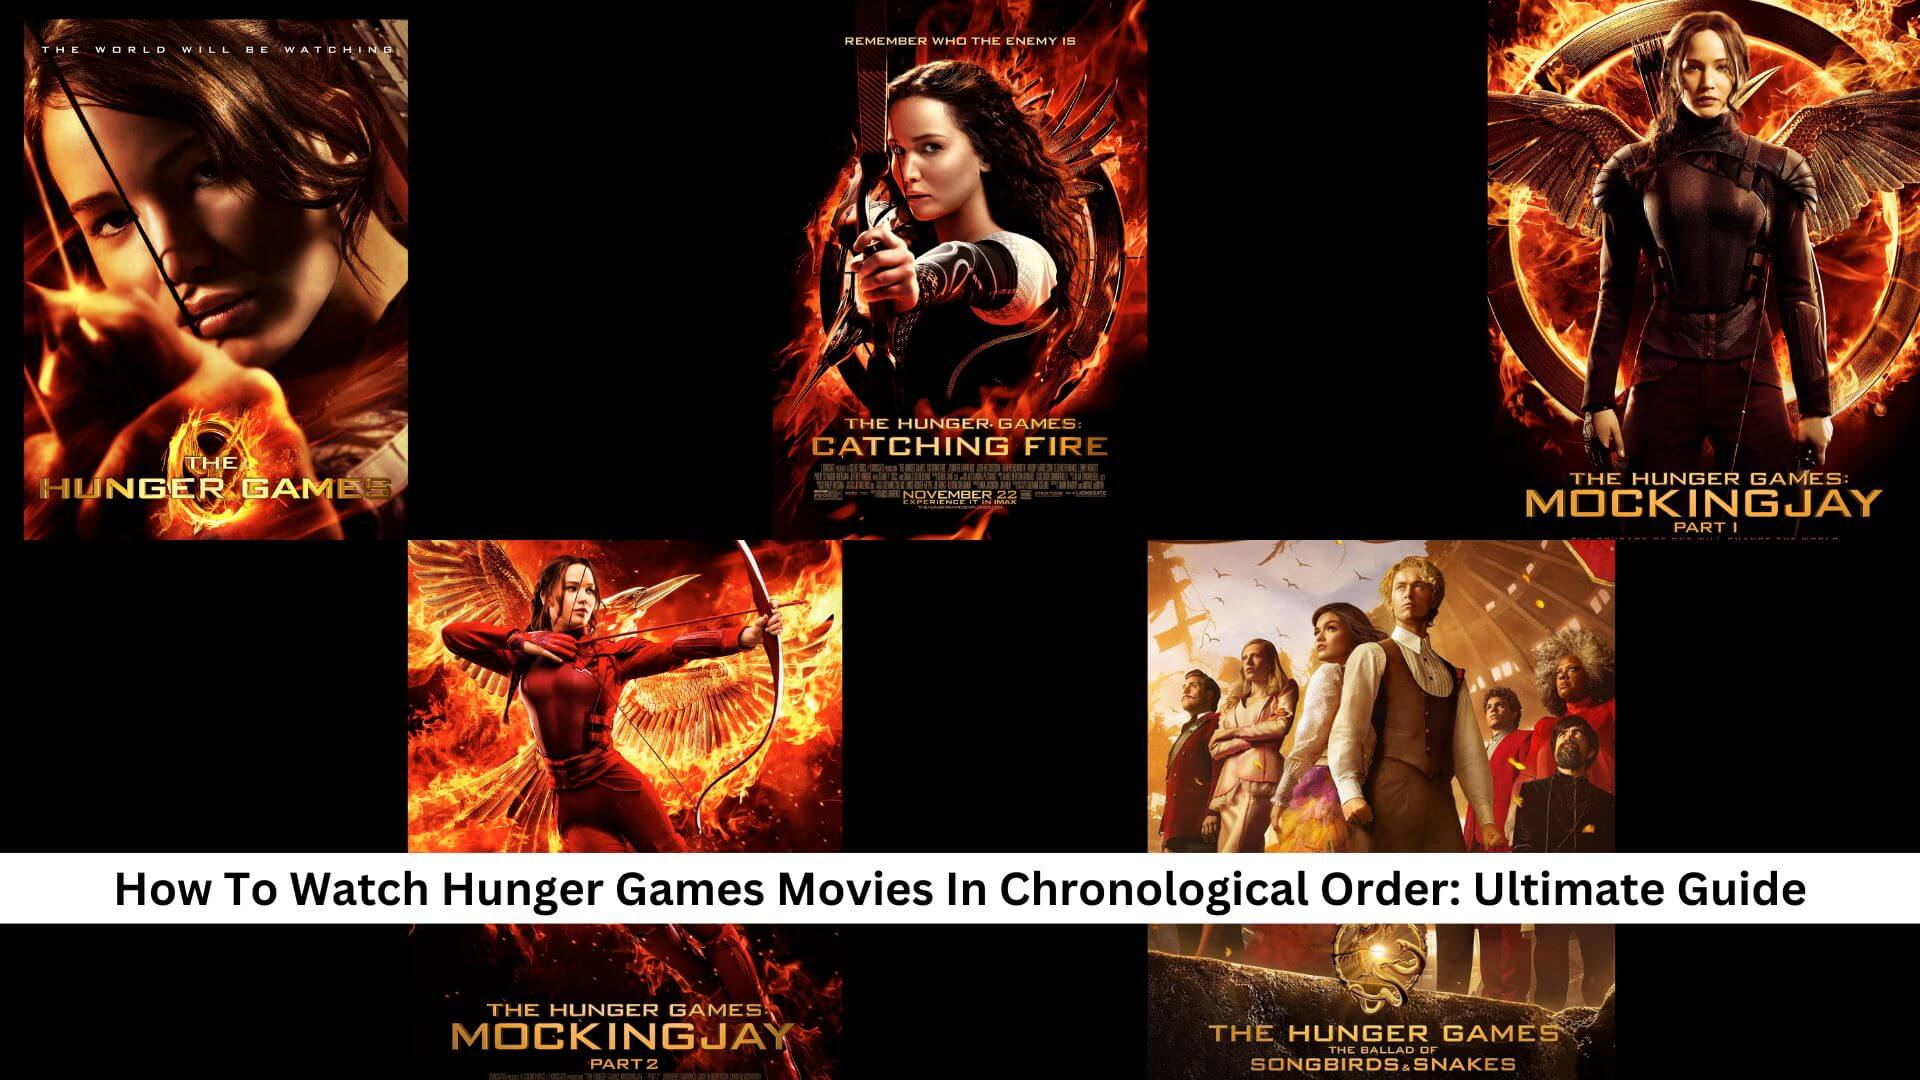 How To Watch Hunger Games Movies In Chronological Order: Ultimate Guide